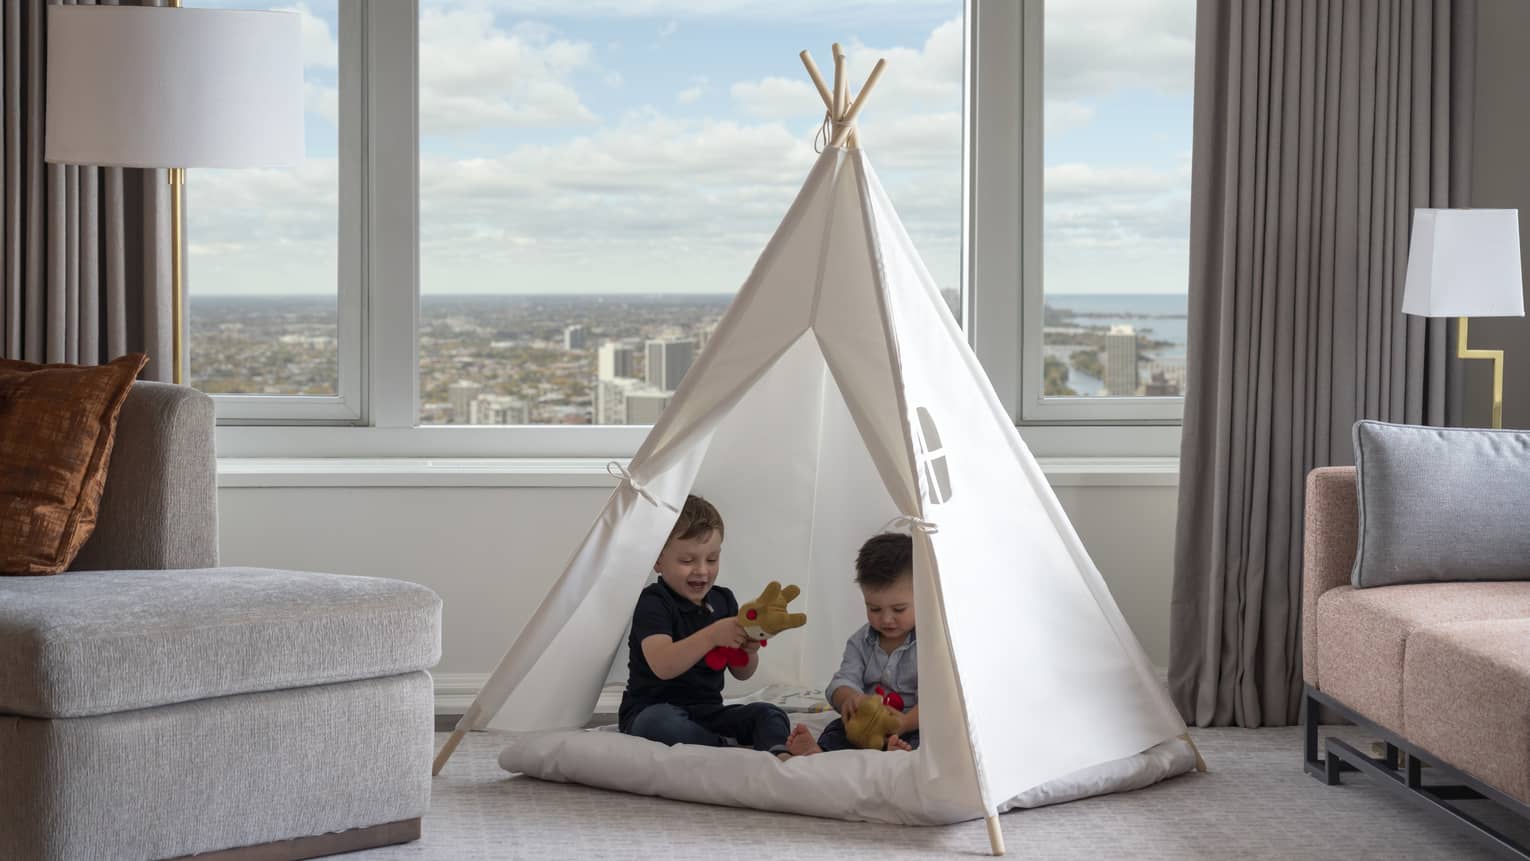 Two young boys playing in a small white tent in a hotel room, a large window looks out at a city behind them.